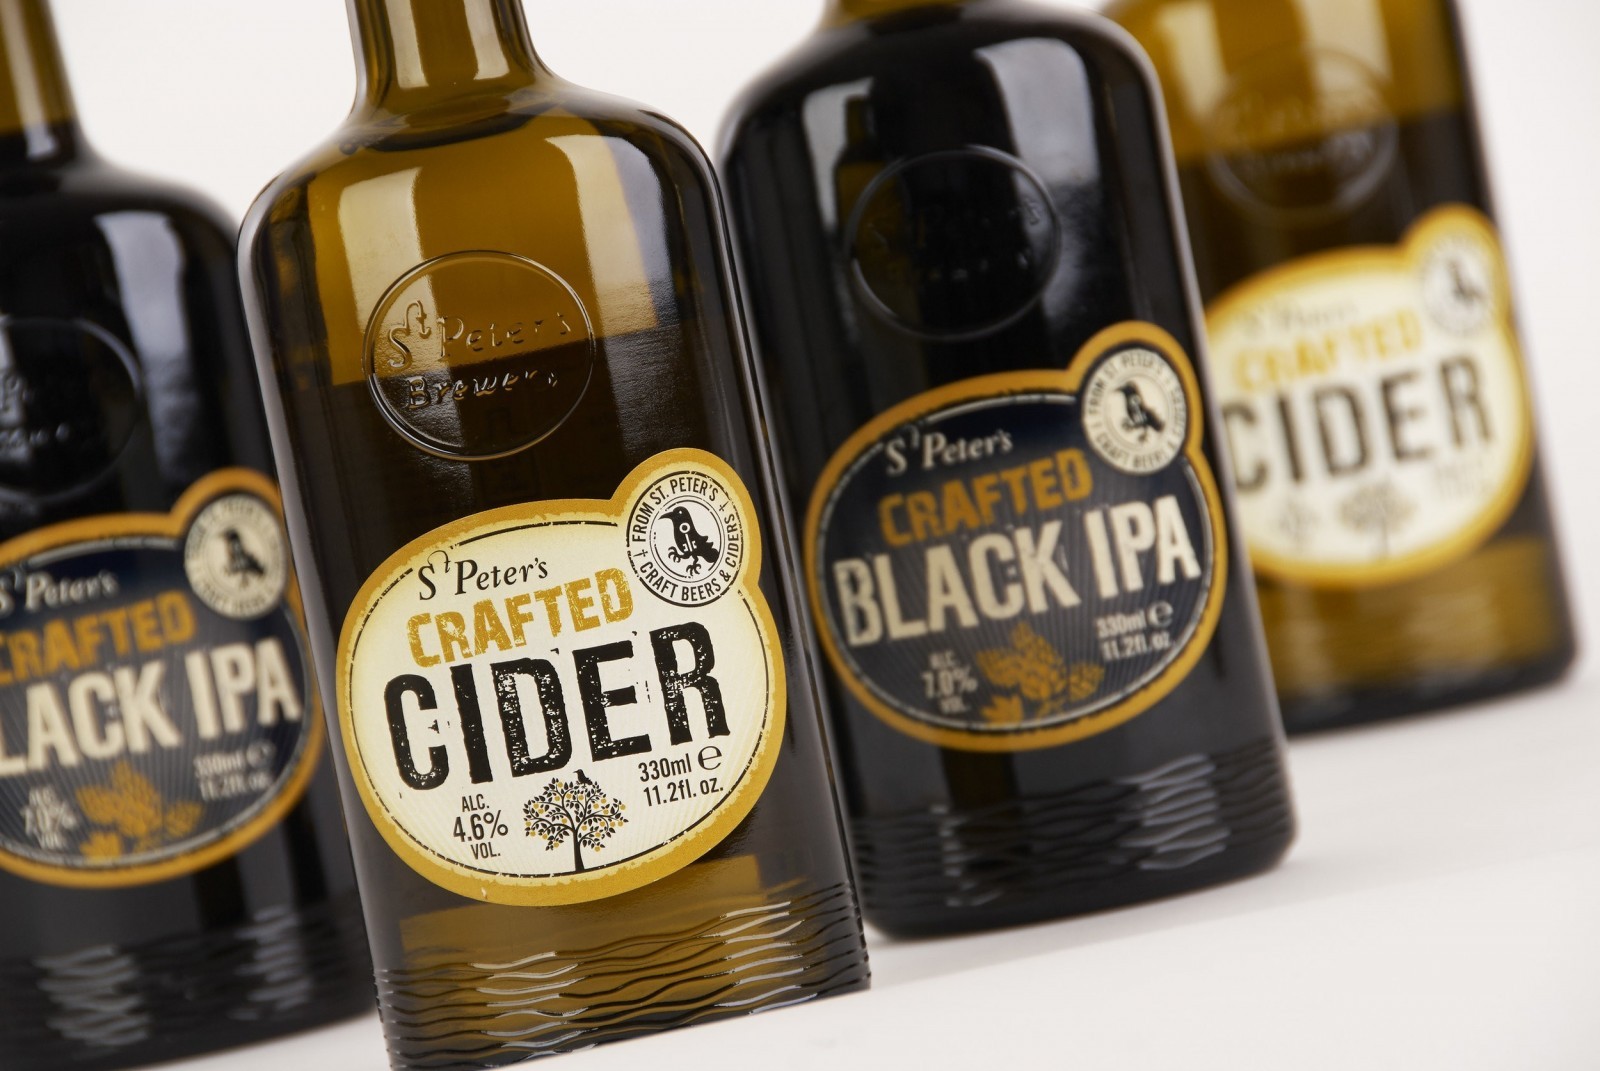 The Finishing Post Design & Marketing Consultants Ltd – St Peter’s Brewery Crafted Range